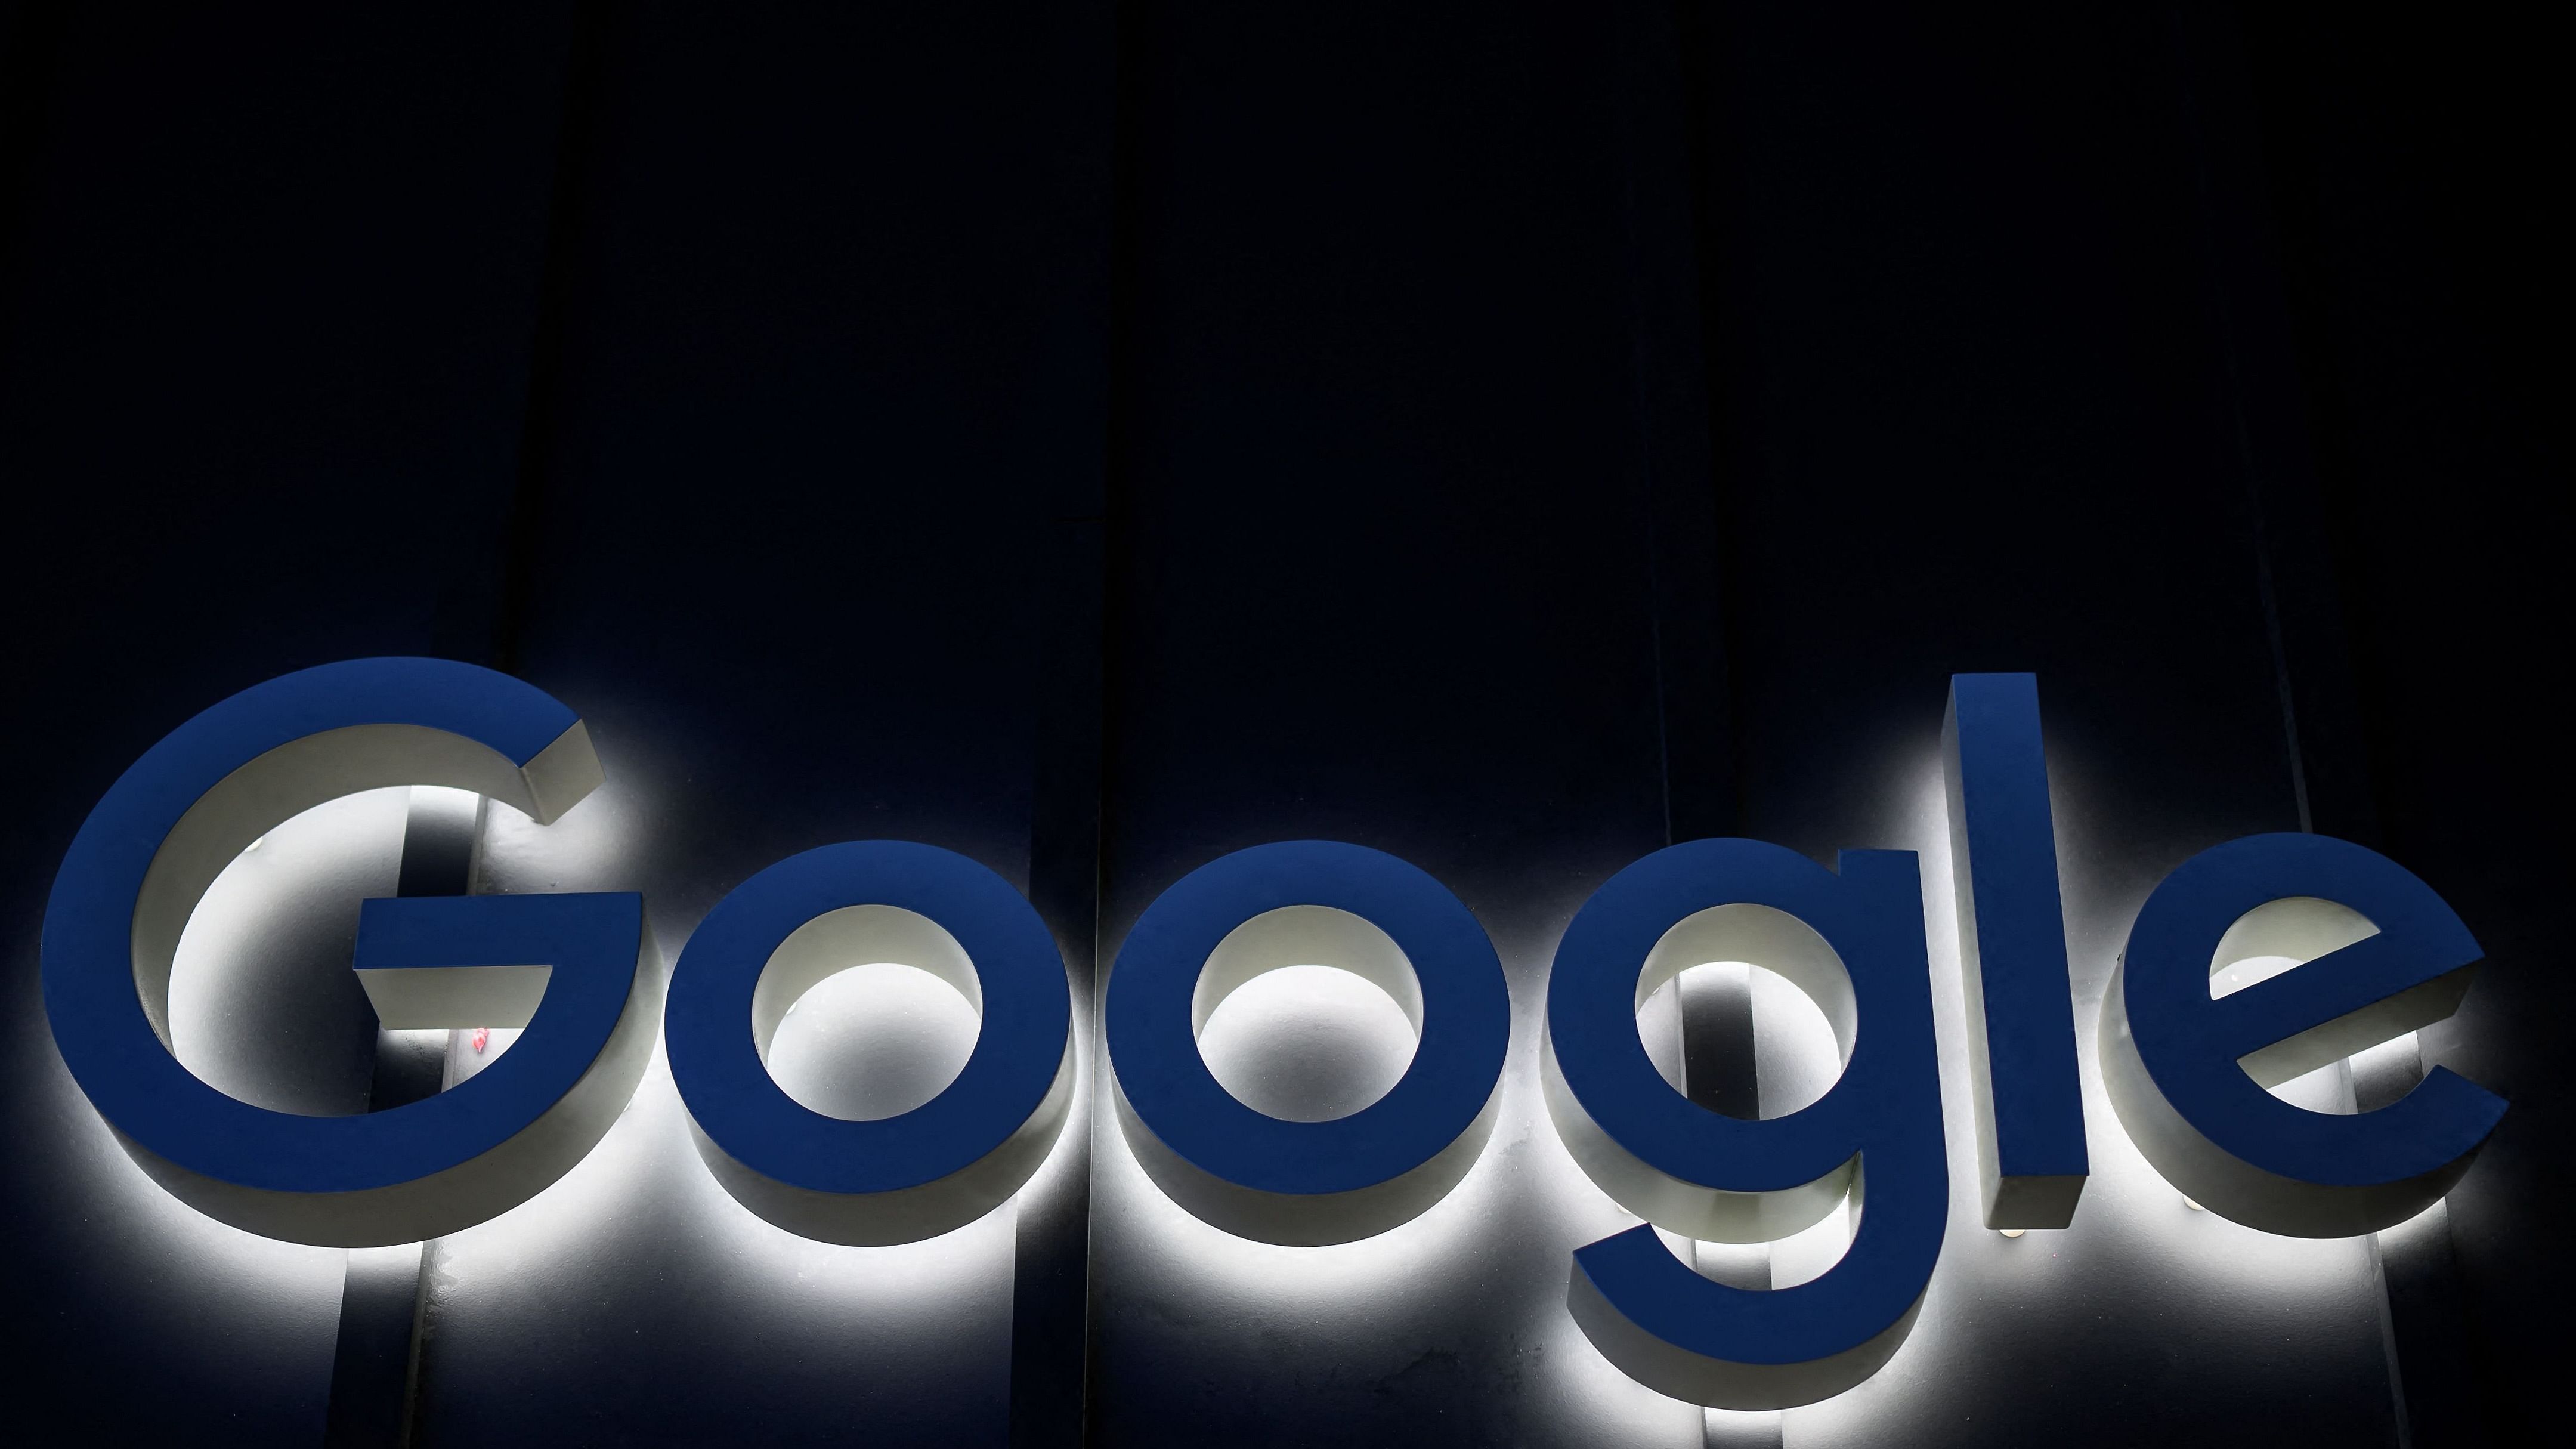 Google has been hit with more than 8 billion euros in EU antitrust fines in the last decade for anti-competitive practices related to its price comparison service. Credit: AFP Photo